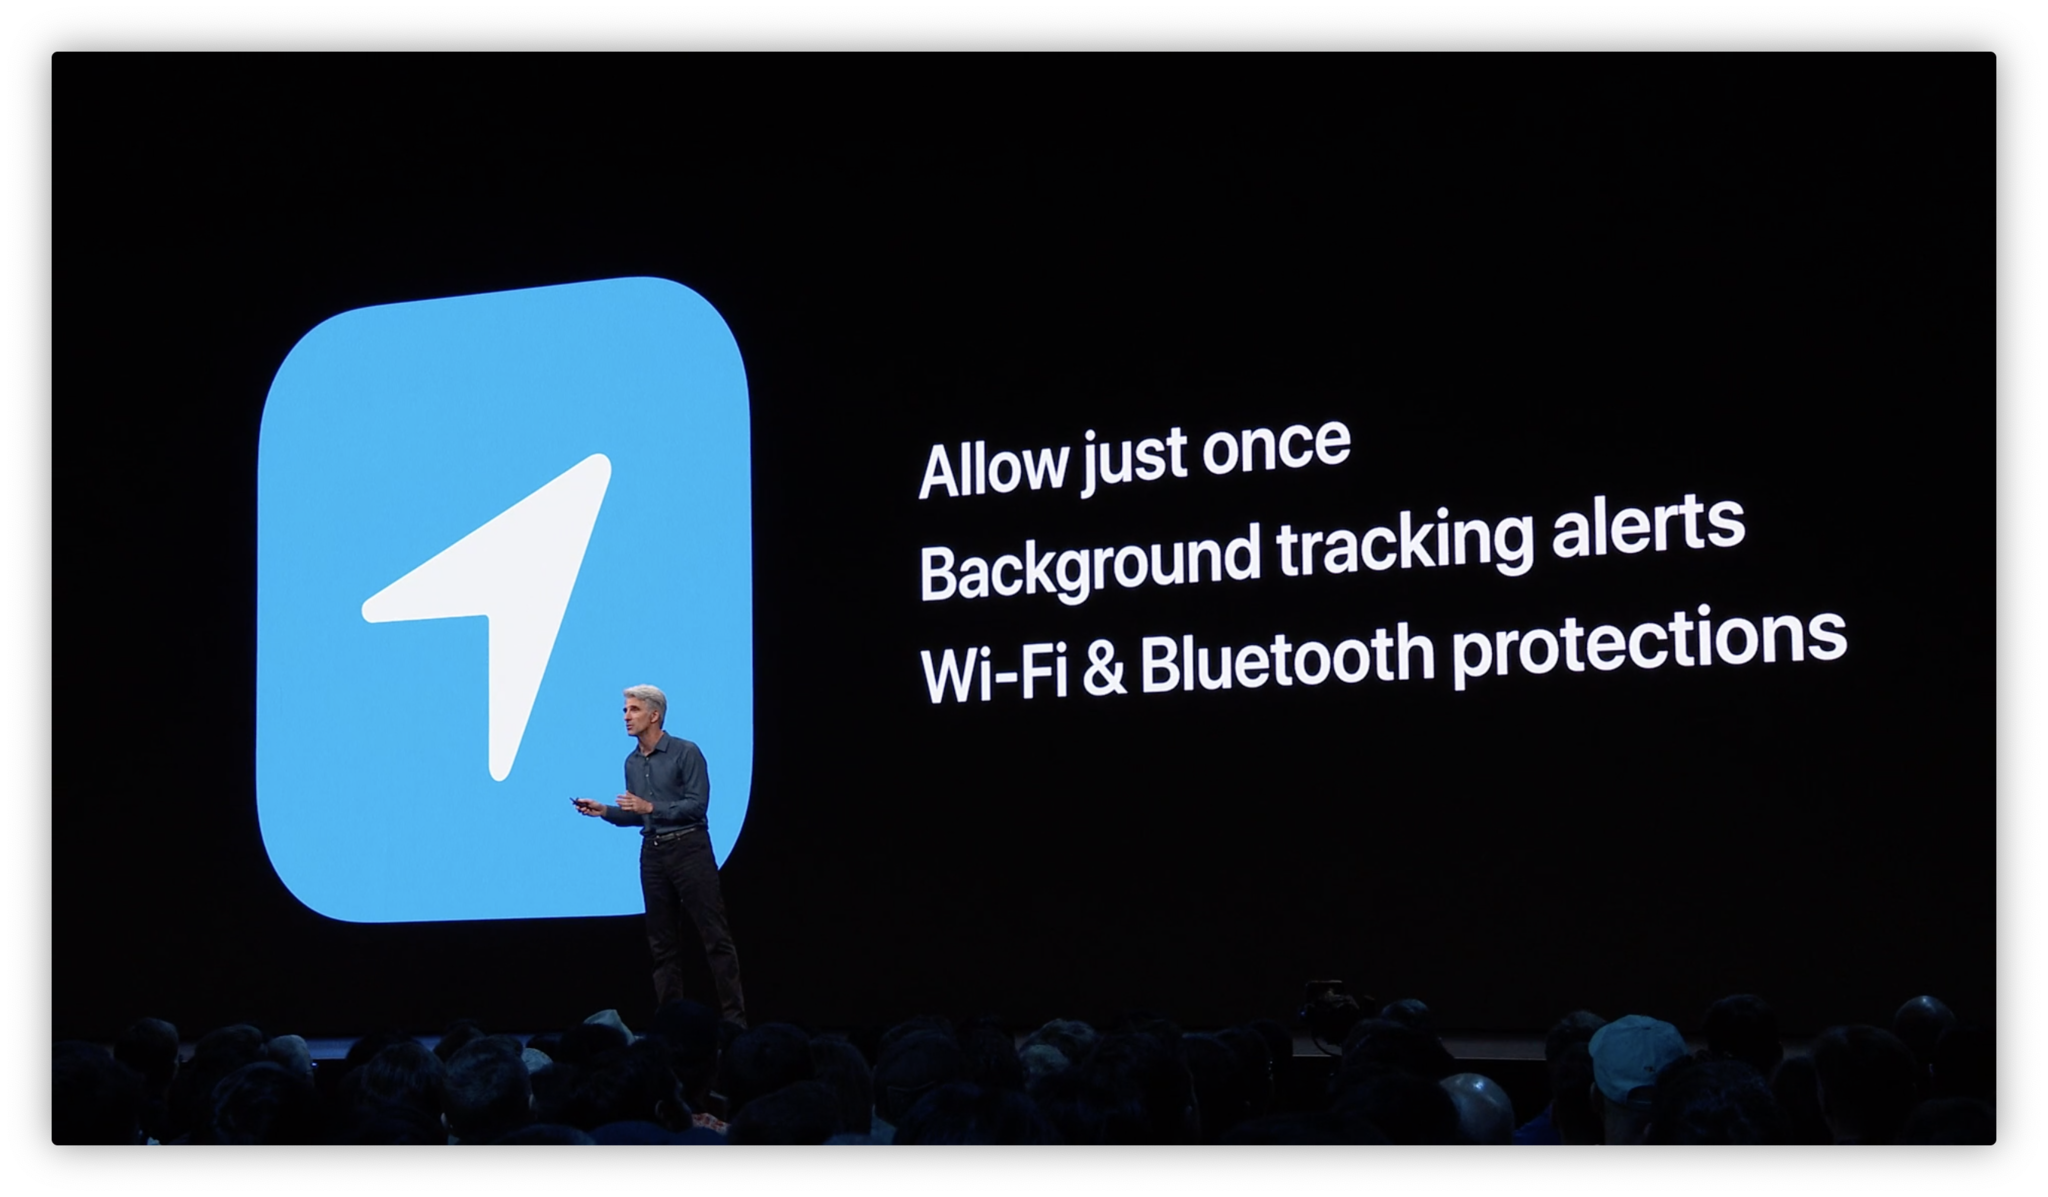 Apple announcing iOS 13 Privacy features at WWDC